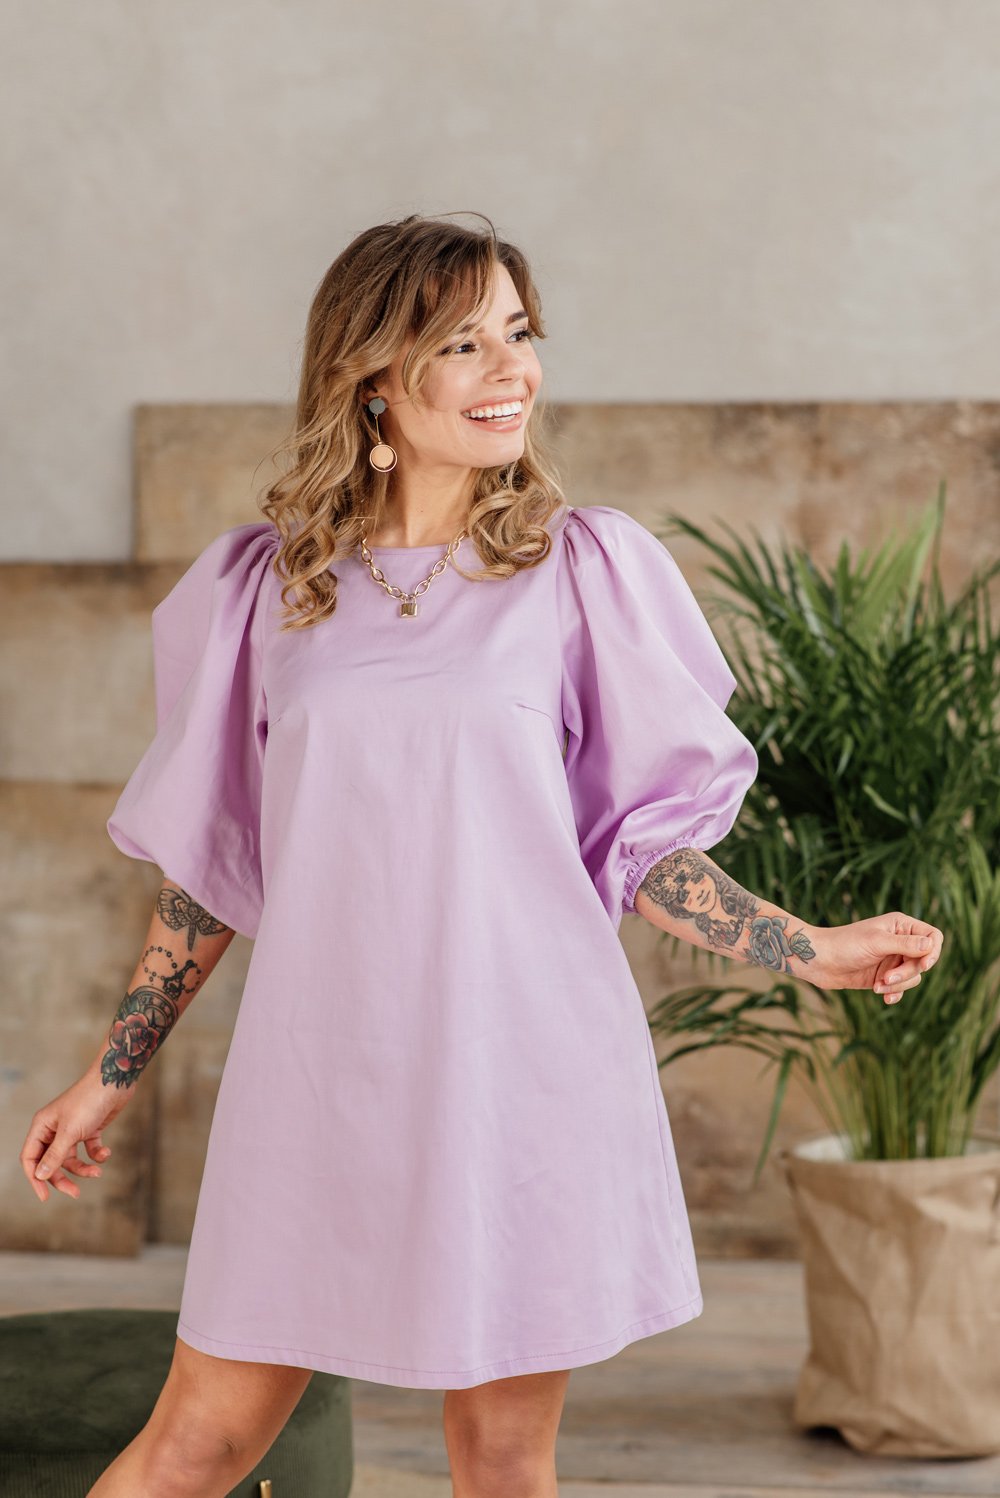 Cotton dress with puff sleeves